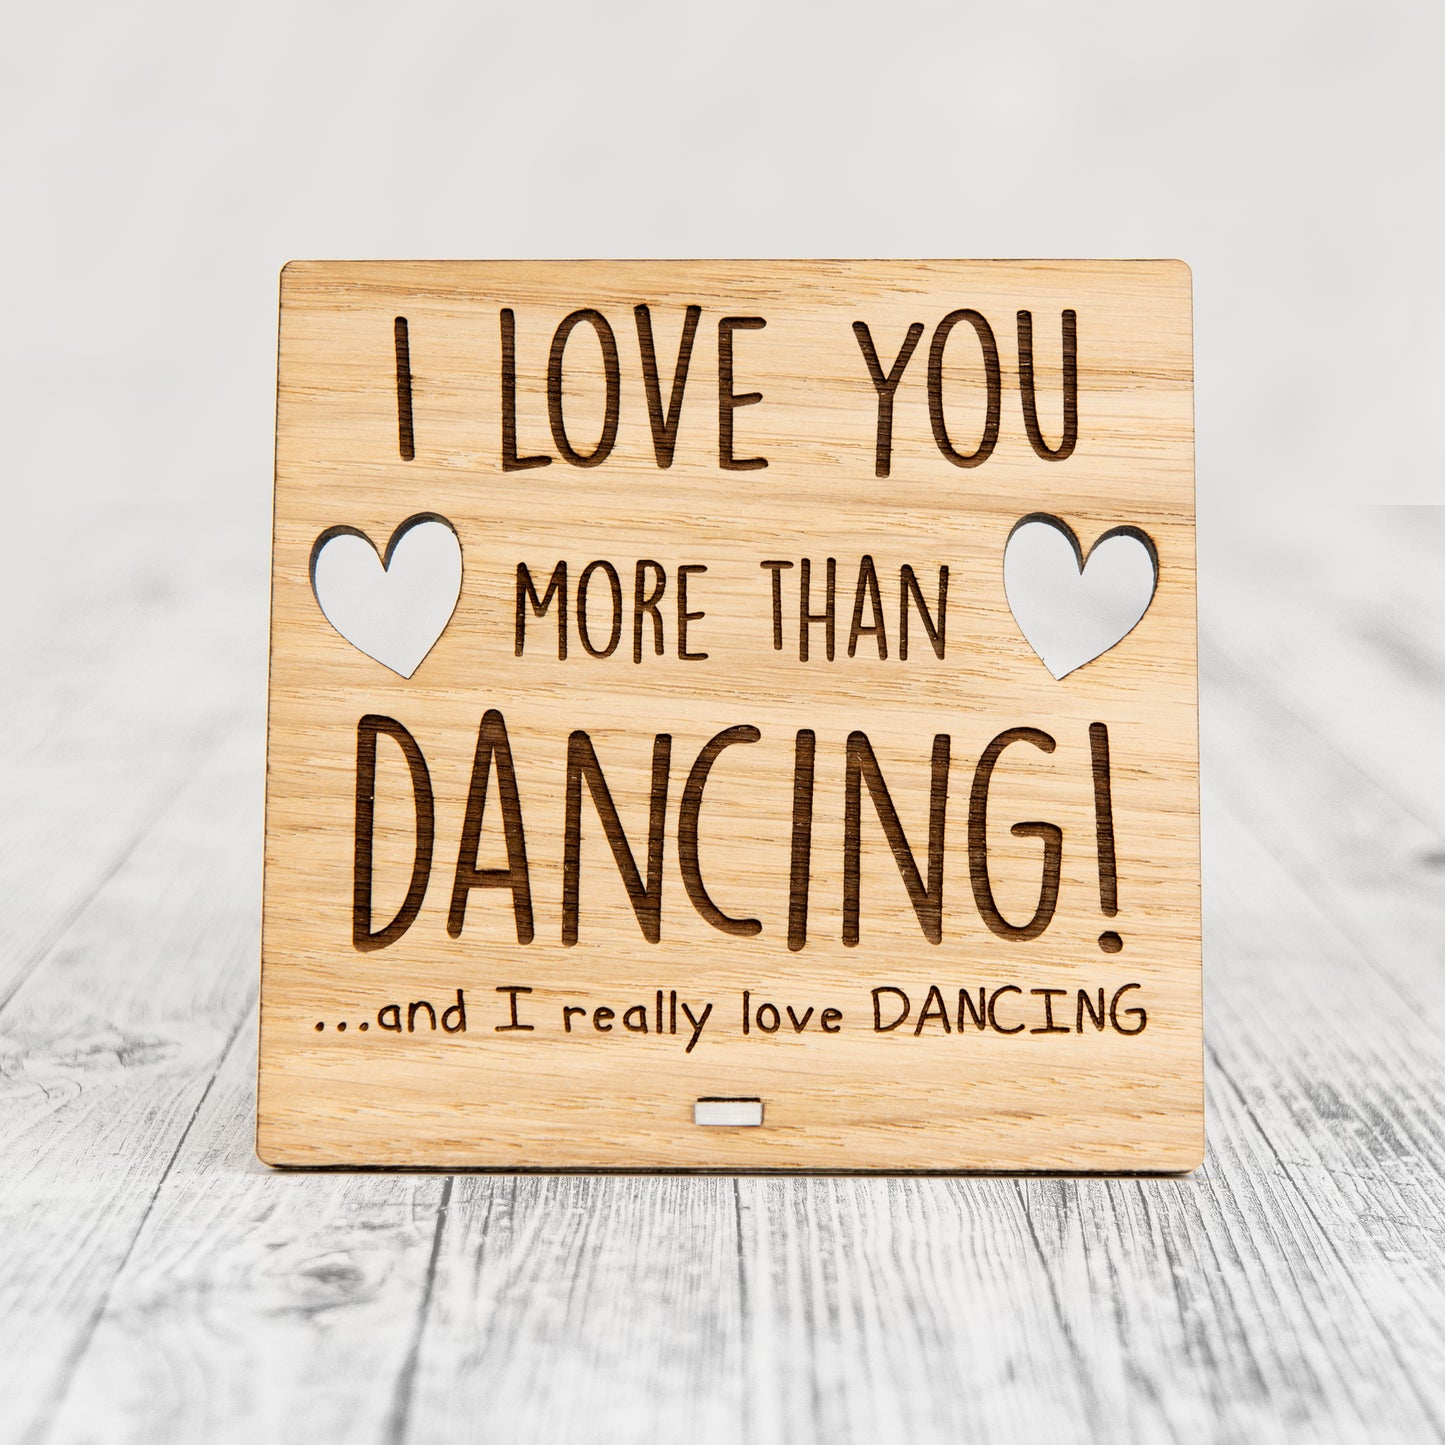 I Love You More Than DANCING - Wooden Valentine's Day Plaque